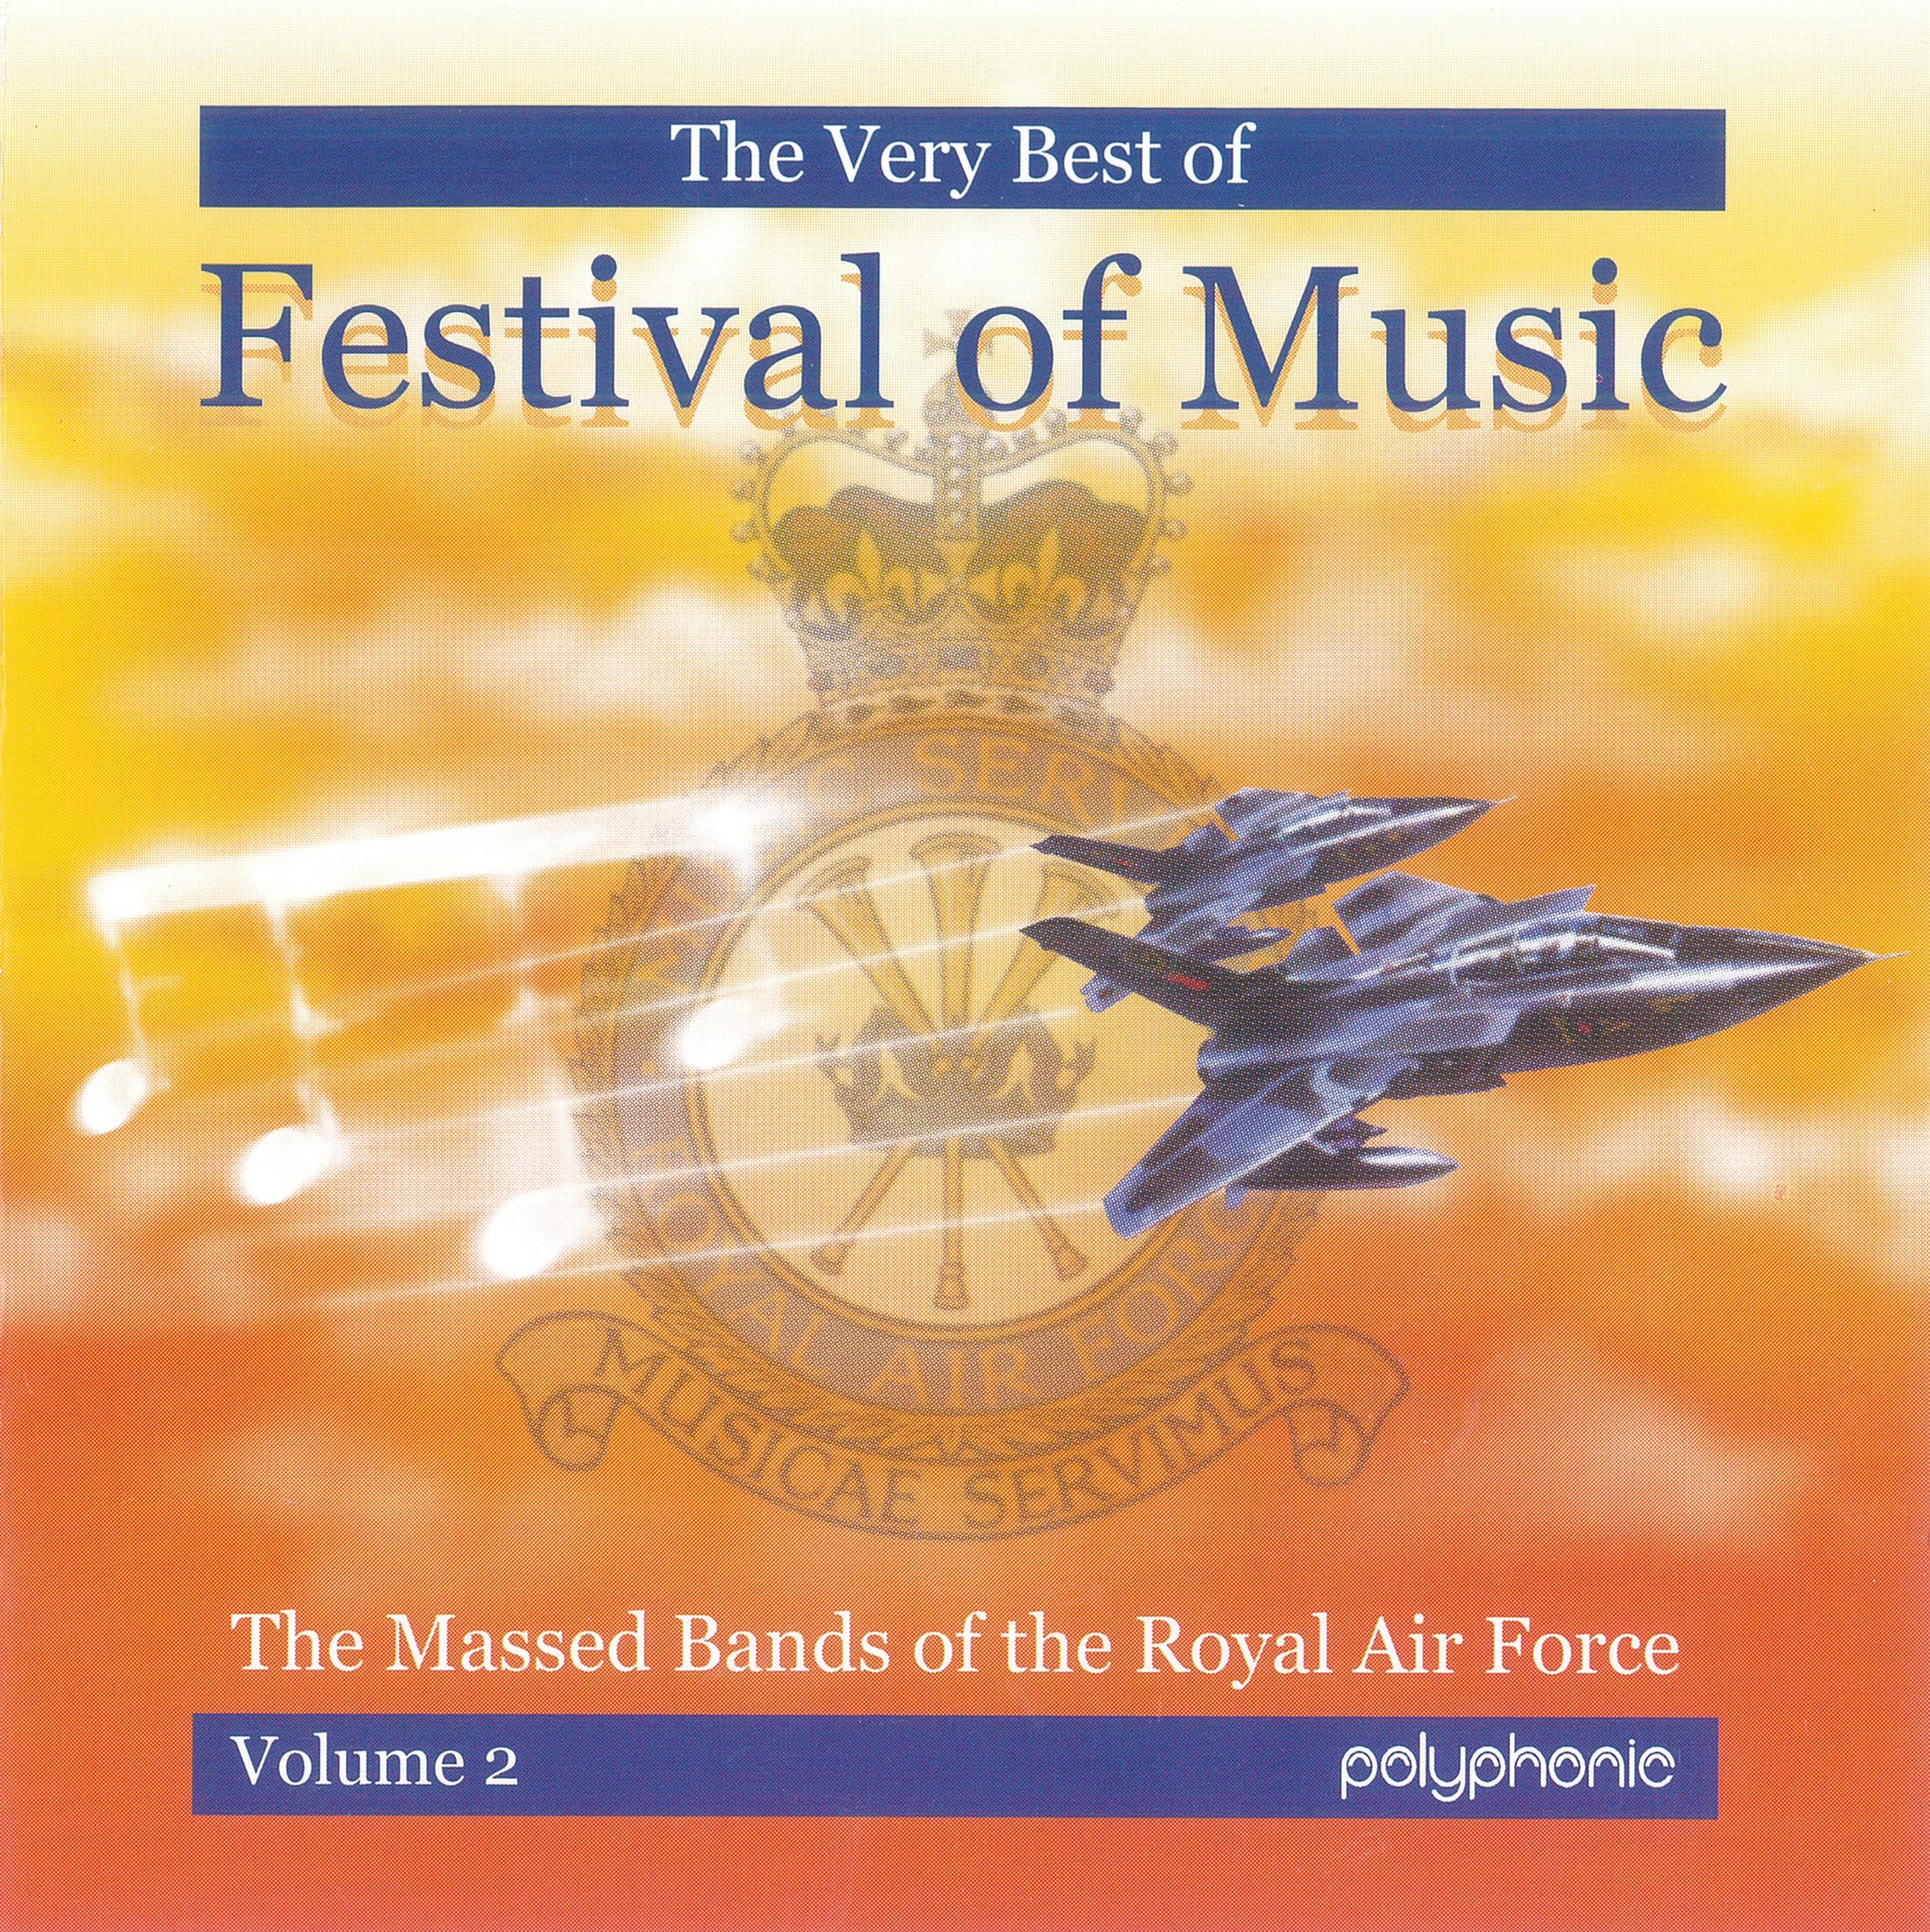 The Very Best of Festival of Music Vol. 2 - CD